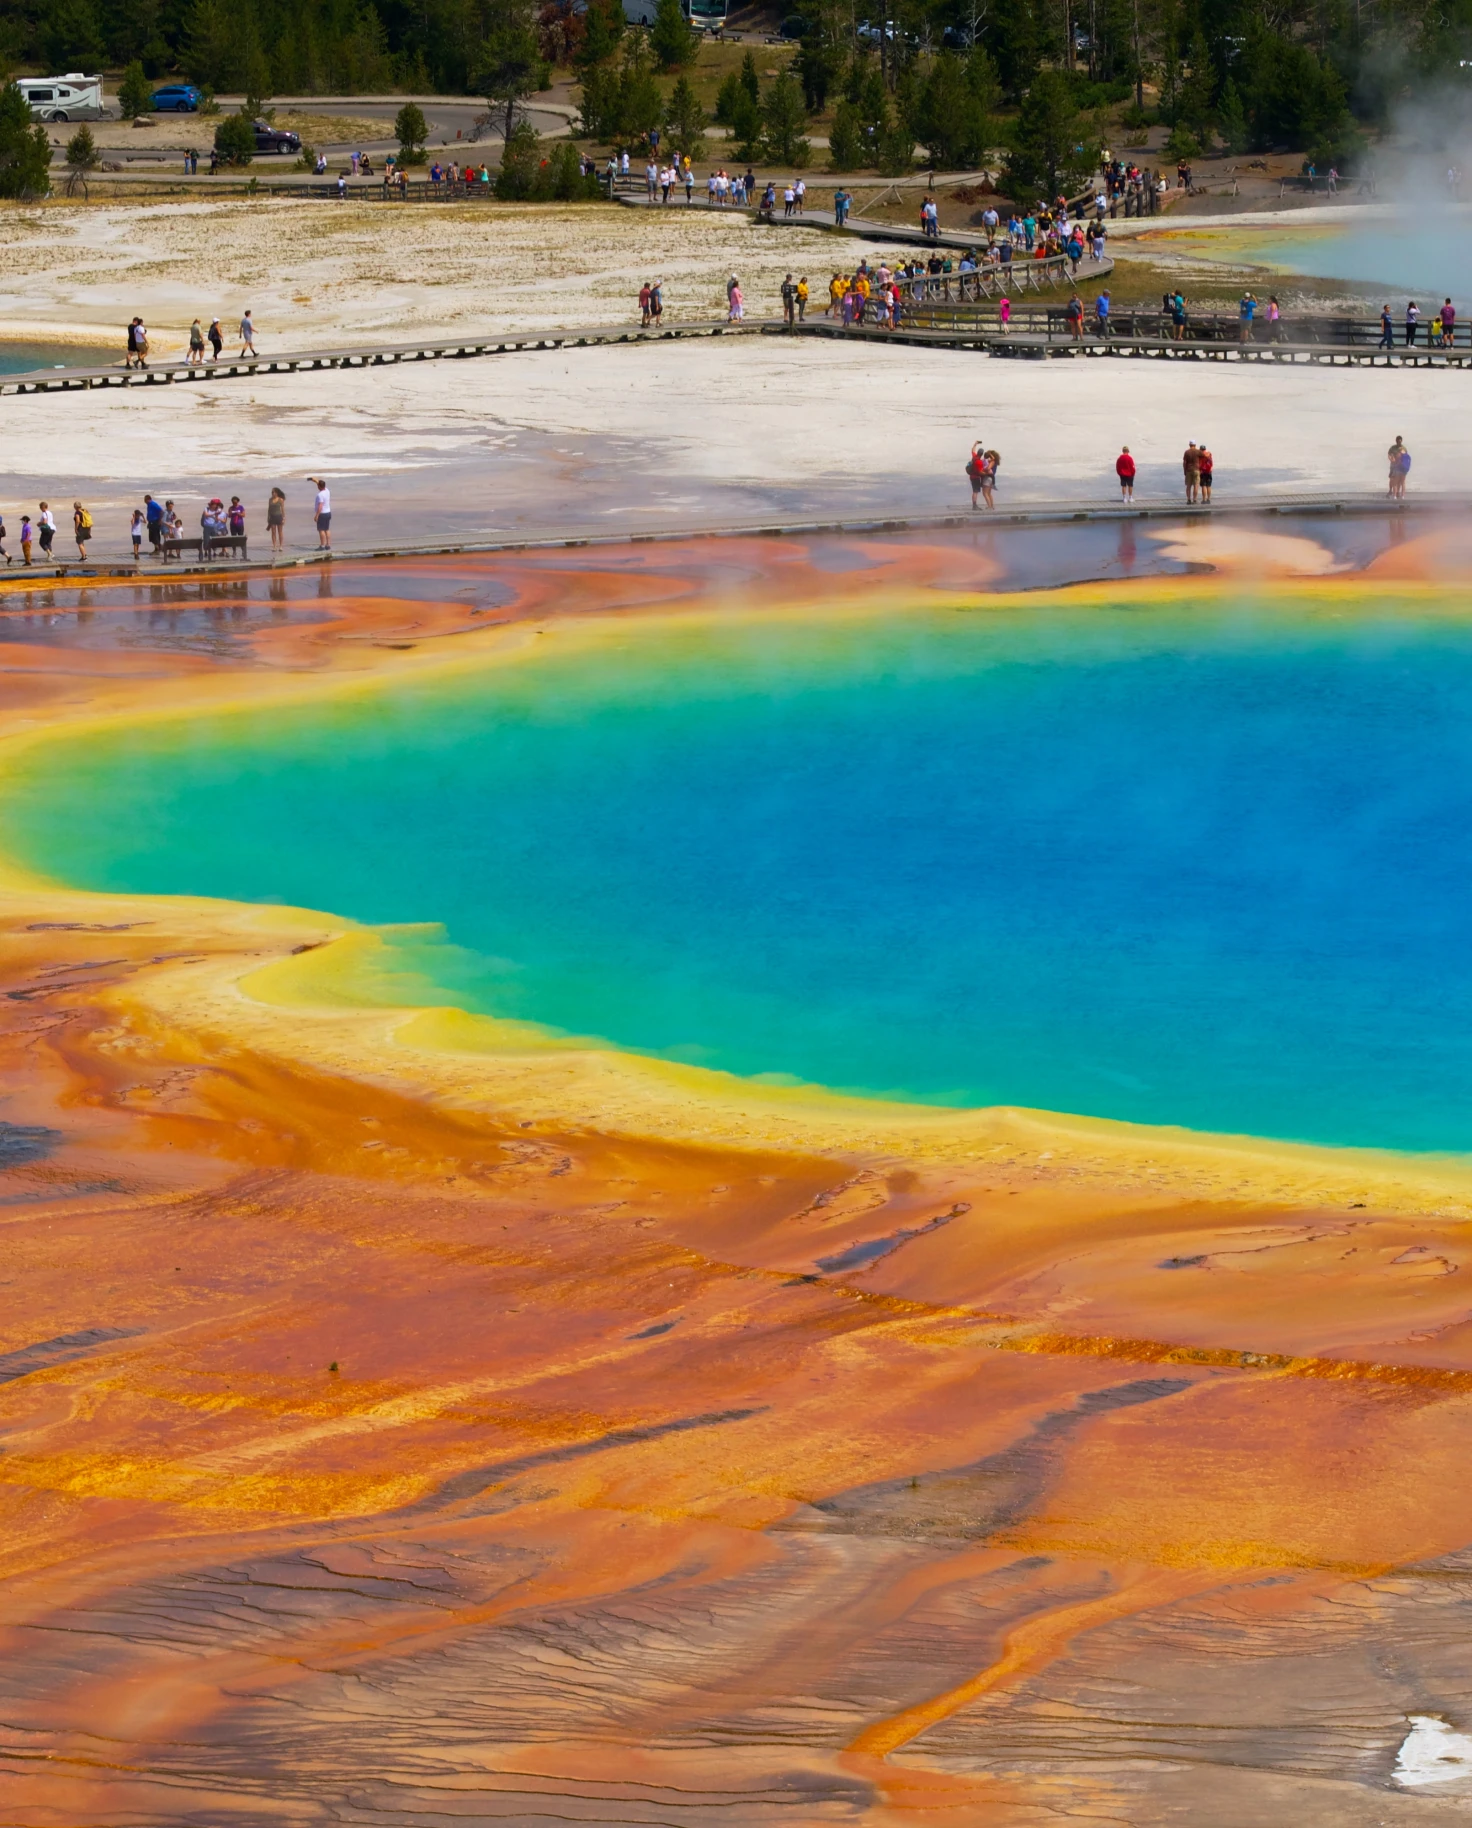 An orange, yellow, green and blue geysir in Yellowstone National Park with people standing around the outskirts.